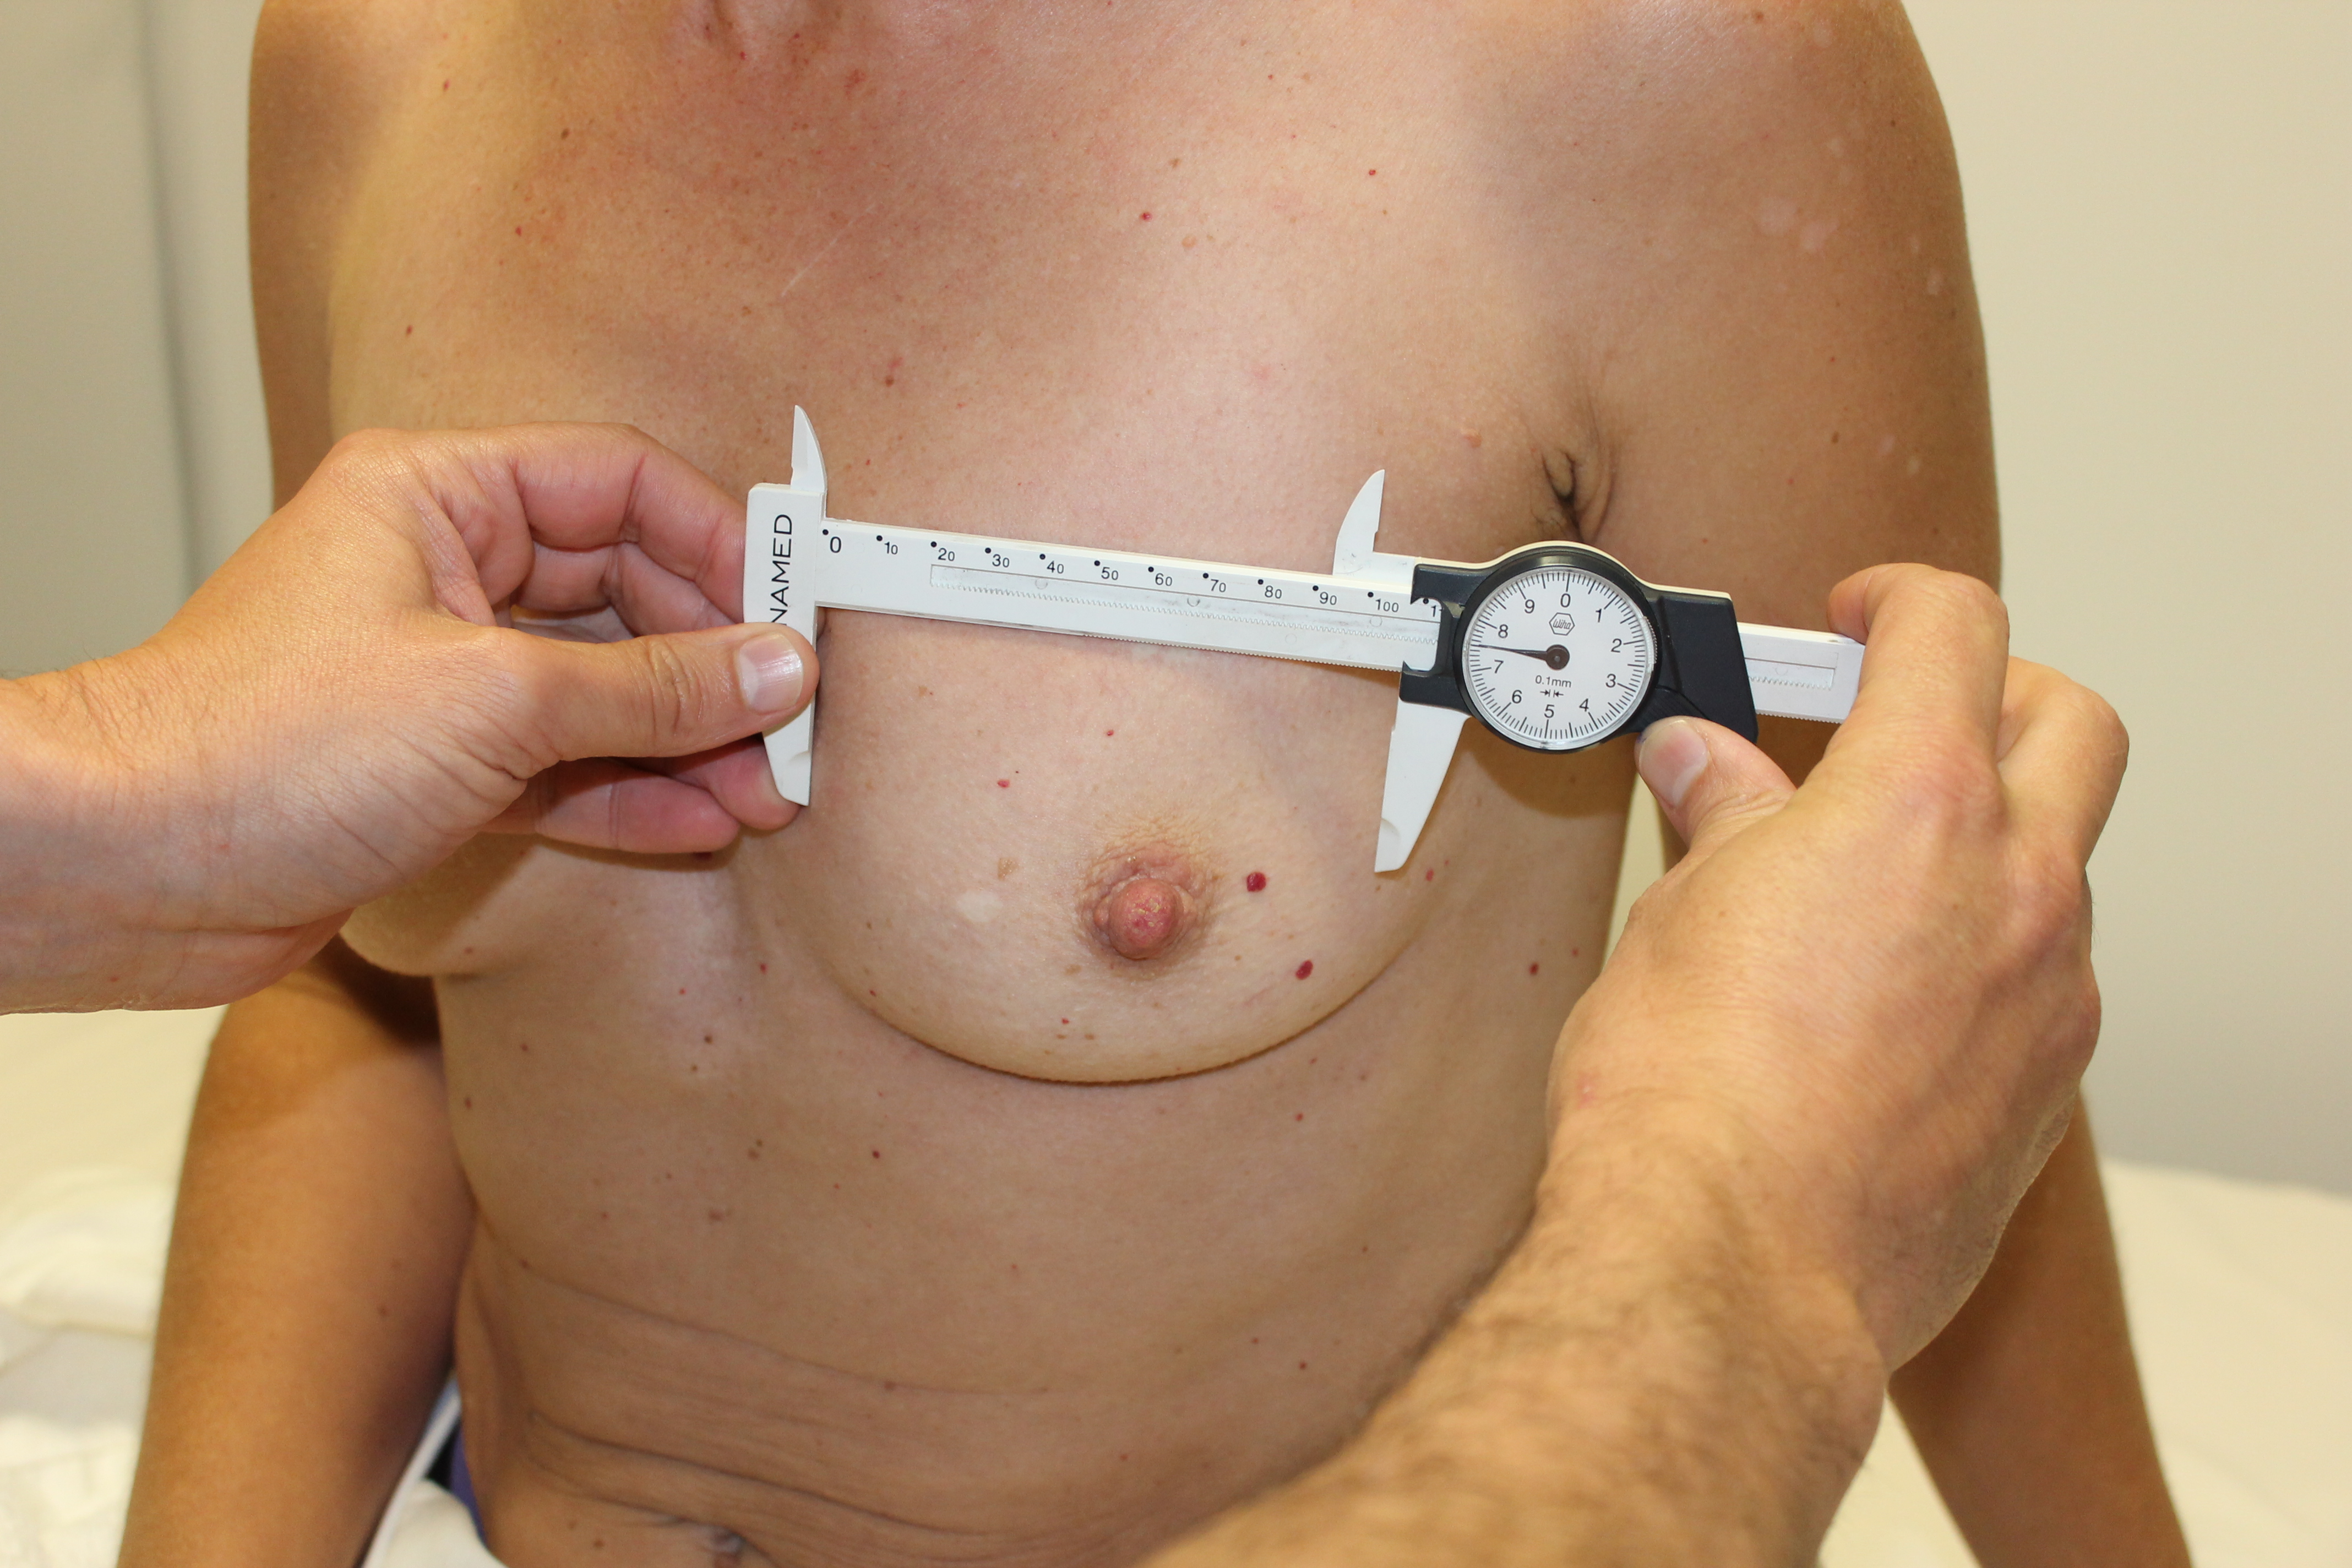 Measuring the breast base width while pinching the skin to